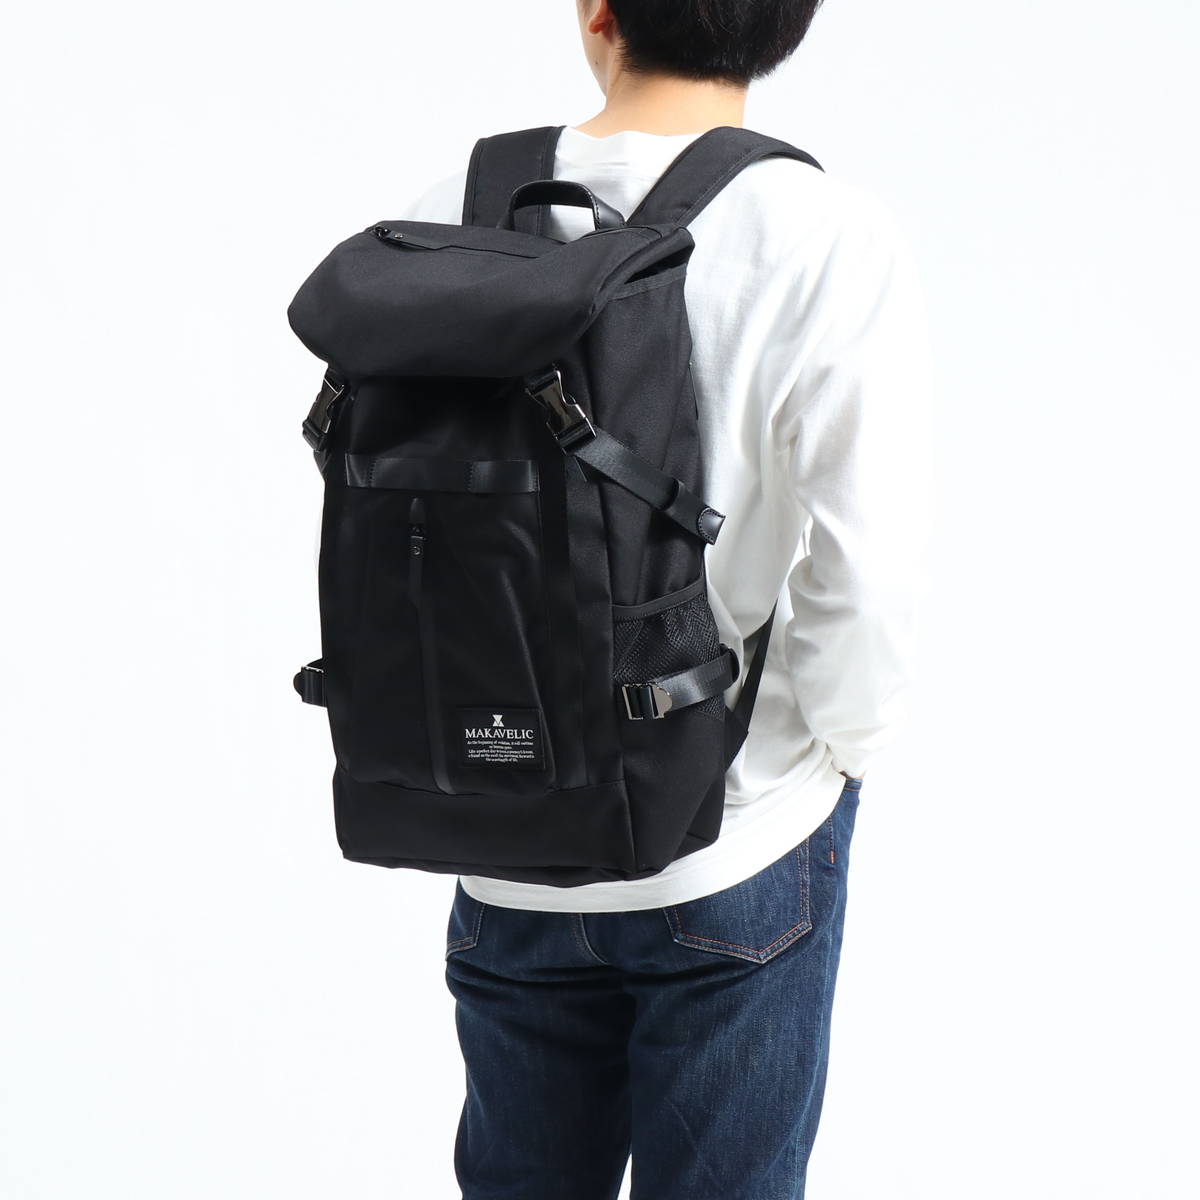 MAKAVELIC マキャベリック CHASE DOUBLE LINE 2 BACKPACK 3120-10126 